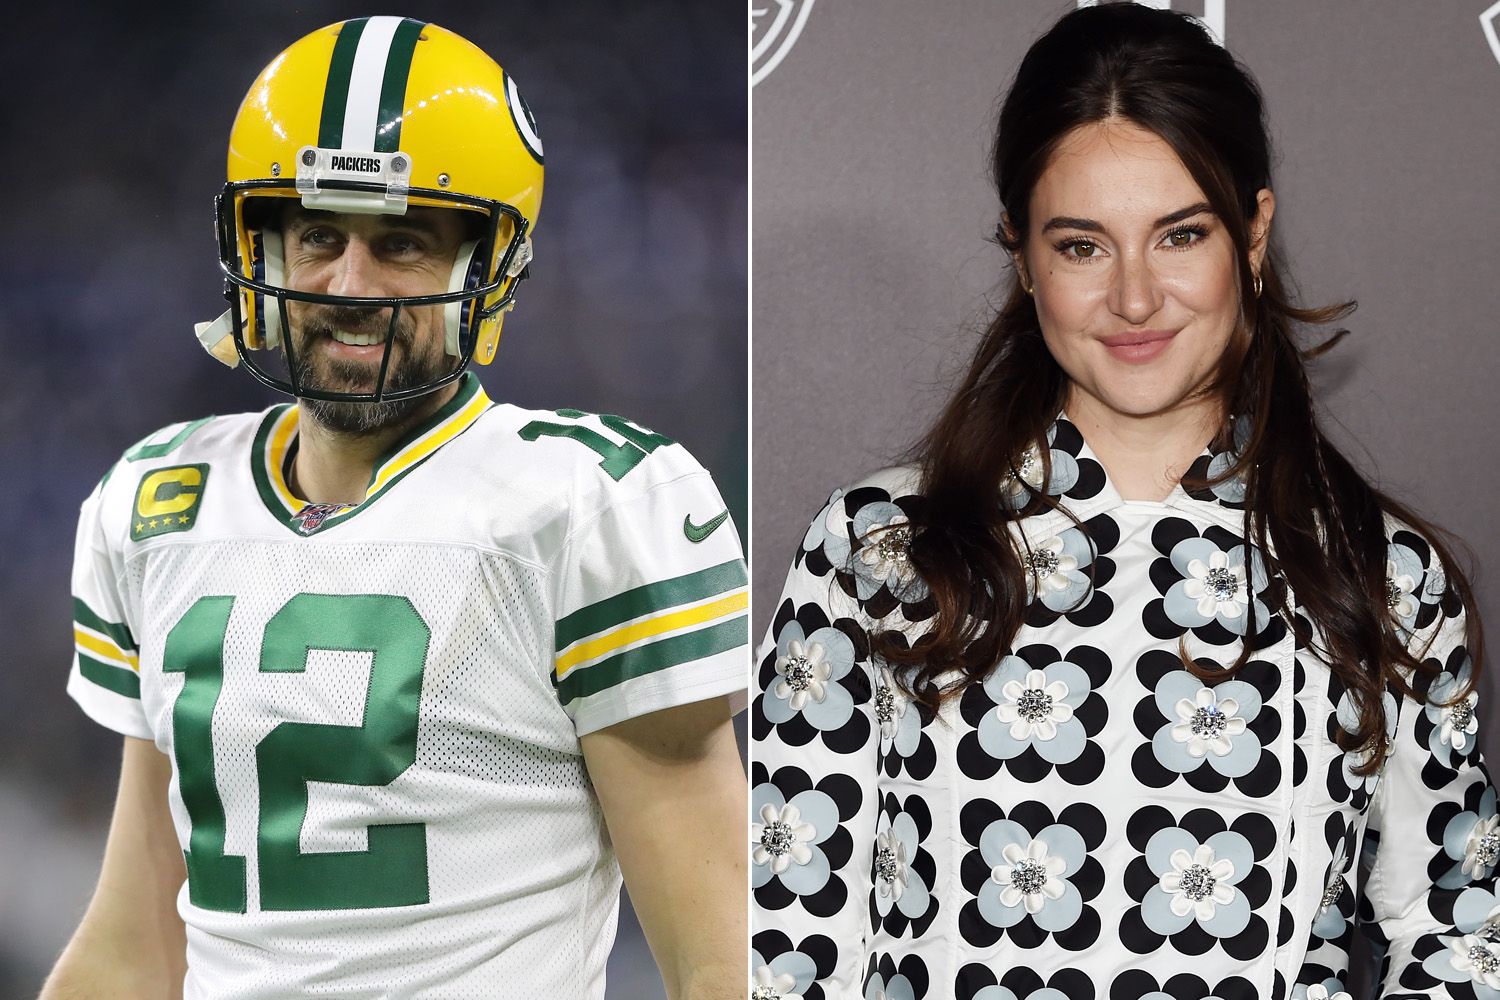 Aaron Rodgers Future With Packers Joe Montana Shares Thoughts!